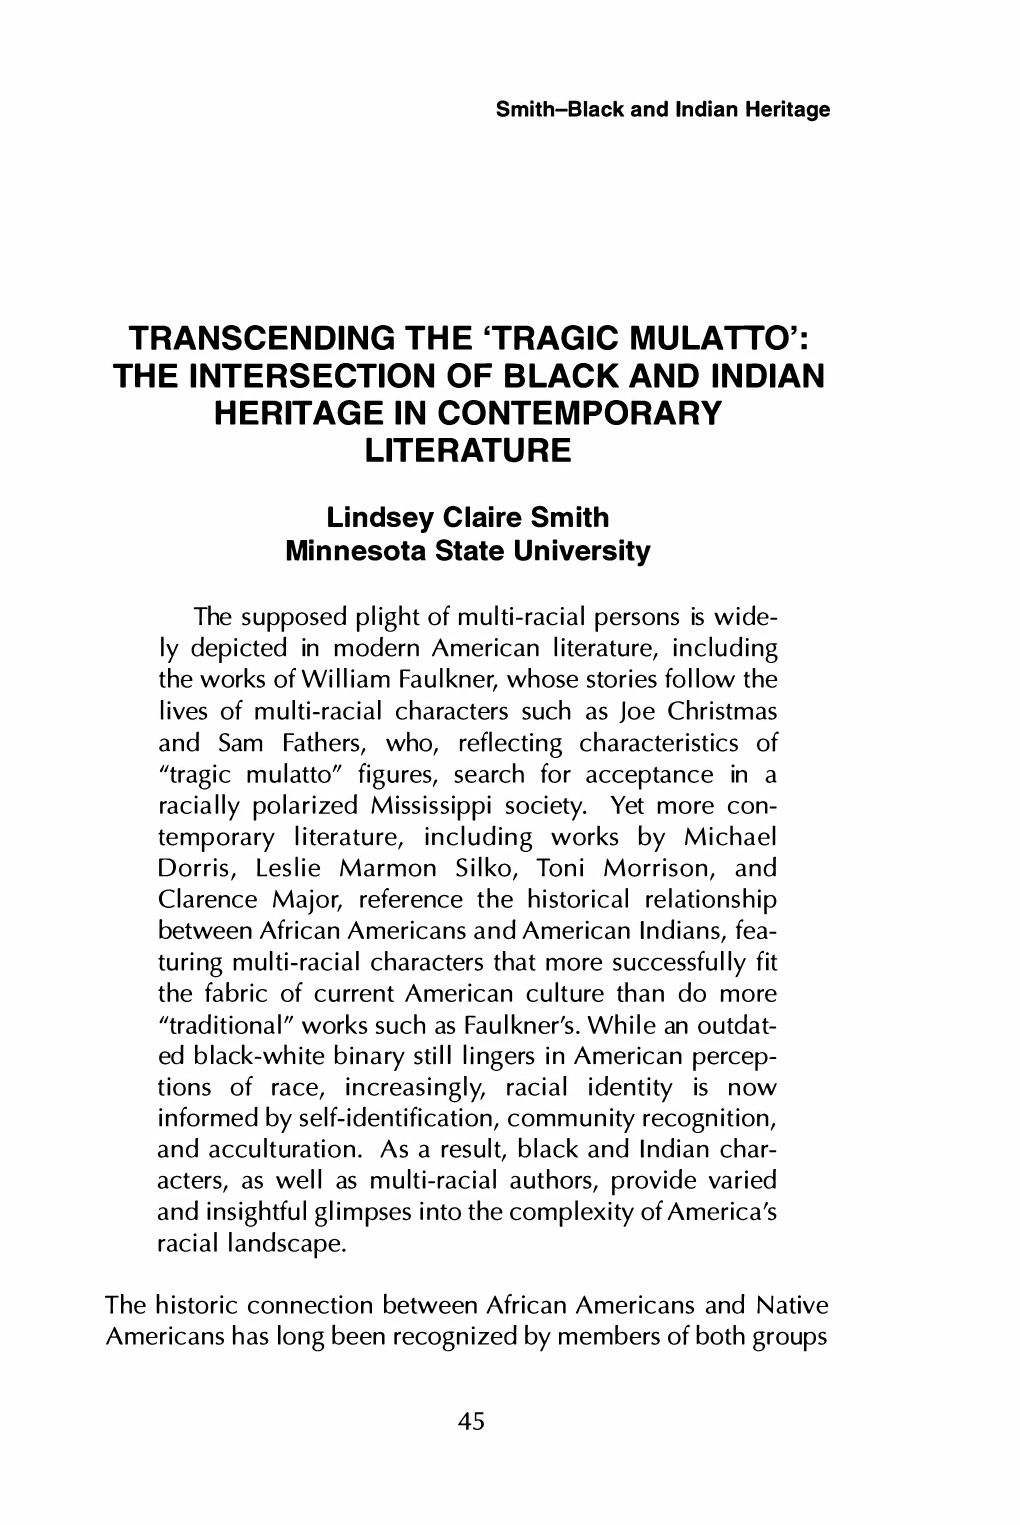 Tragic Mulatto': the Intersection of Black and Indian Heritage in Contemporary Literature